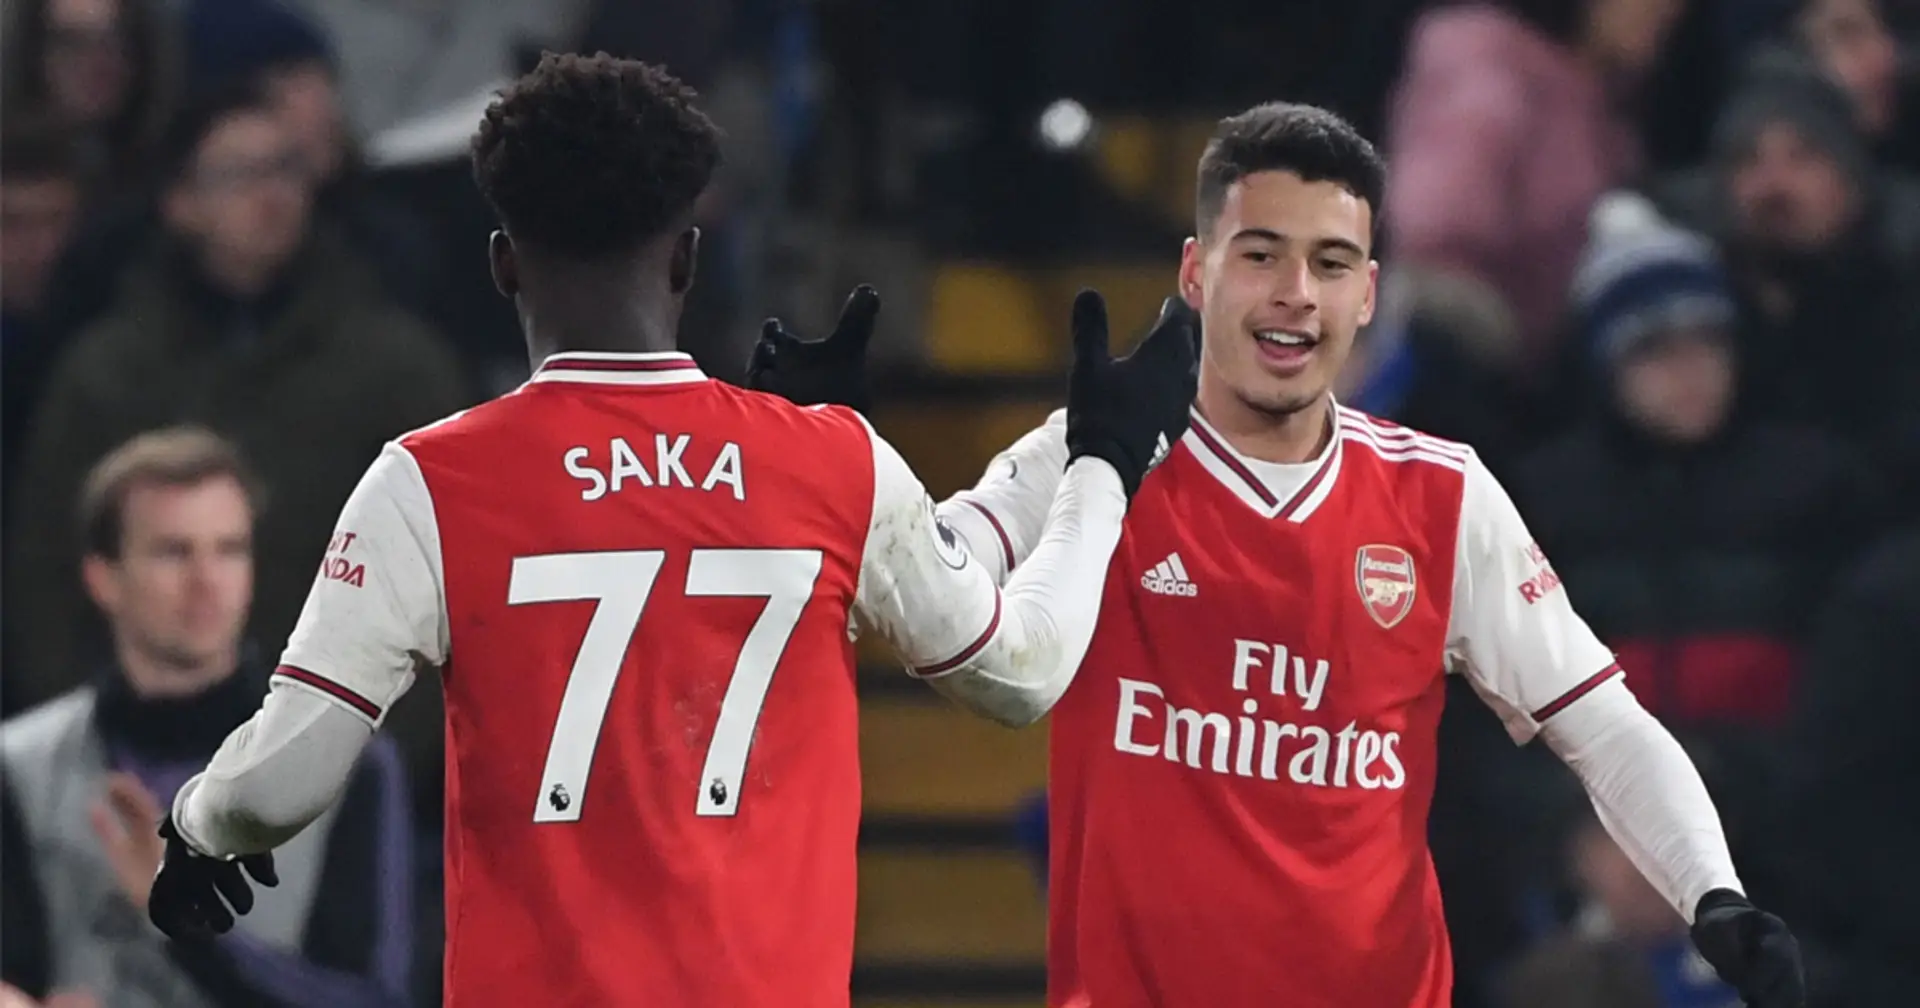 'It's crazy when you look at these good young players': Aubameyang ecstatic over Smith Rowe, Saka, Martinelli